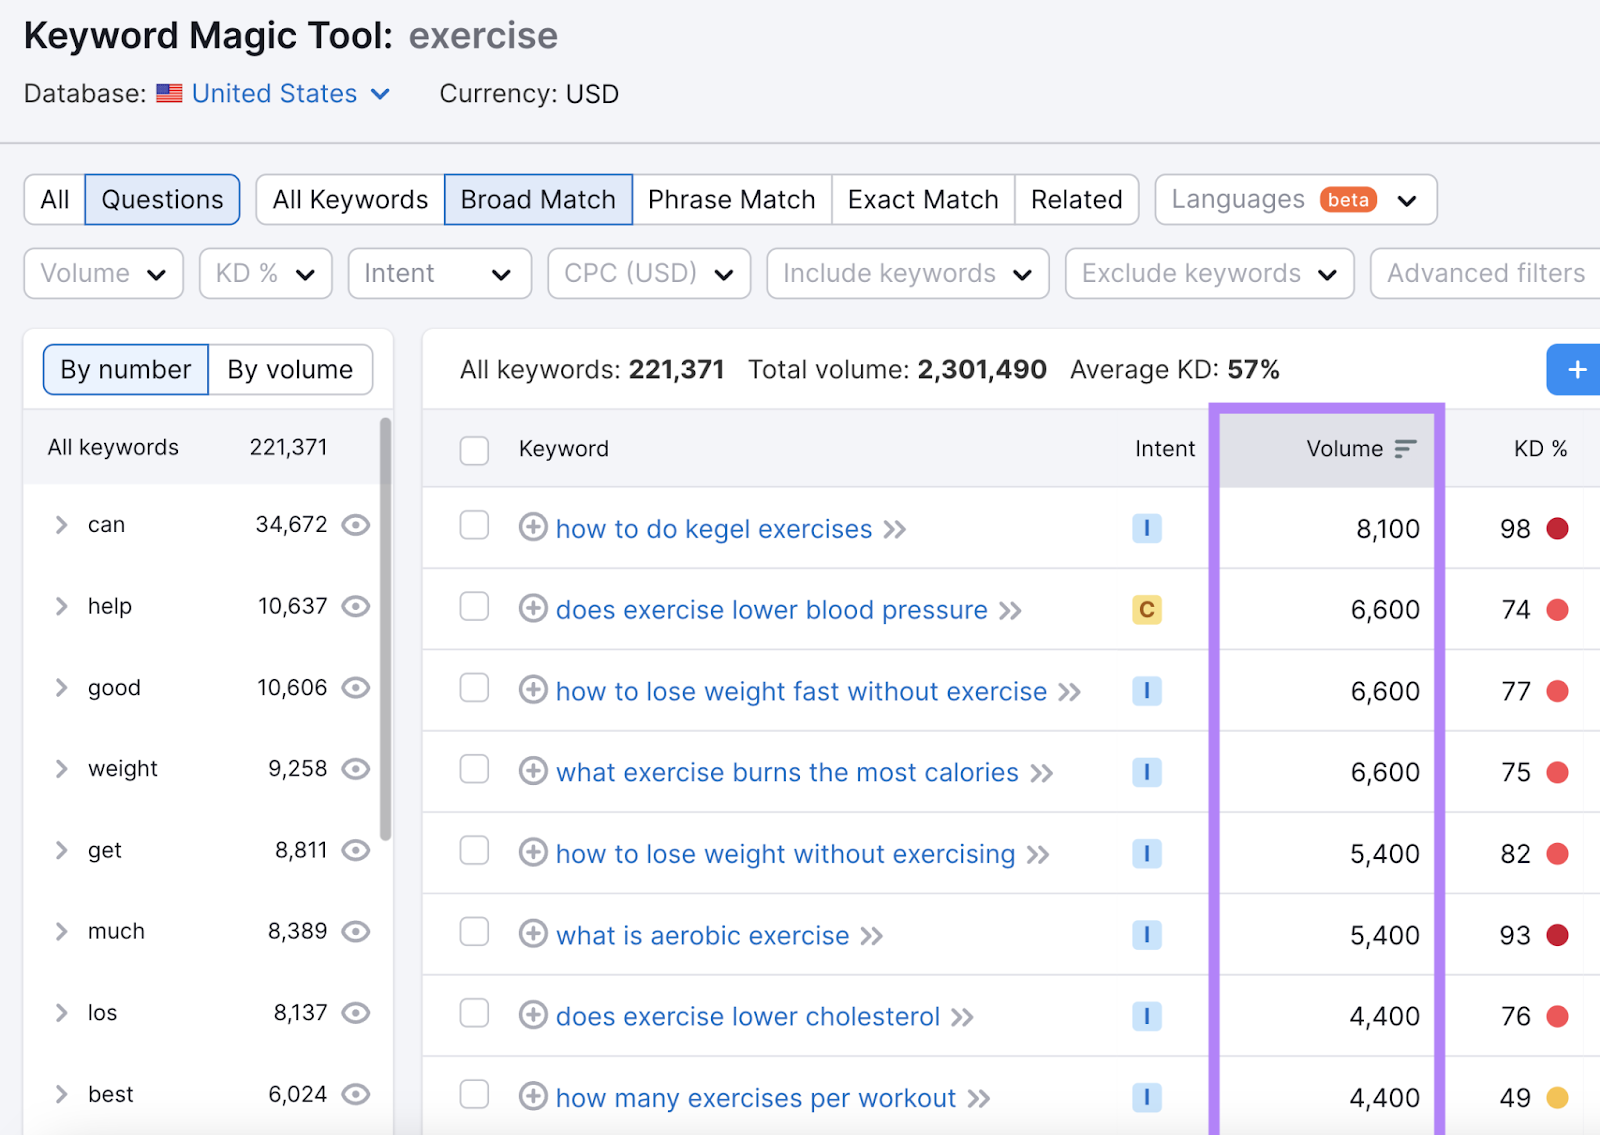 "Volume" metric in Keyword Magic Tool shown for keywords related to "exercise"